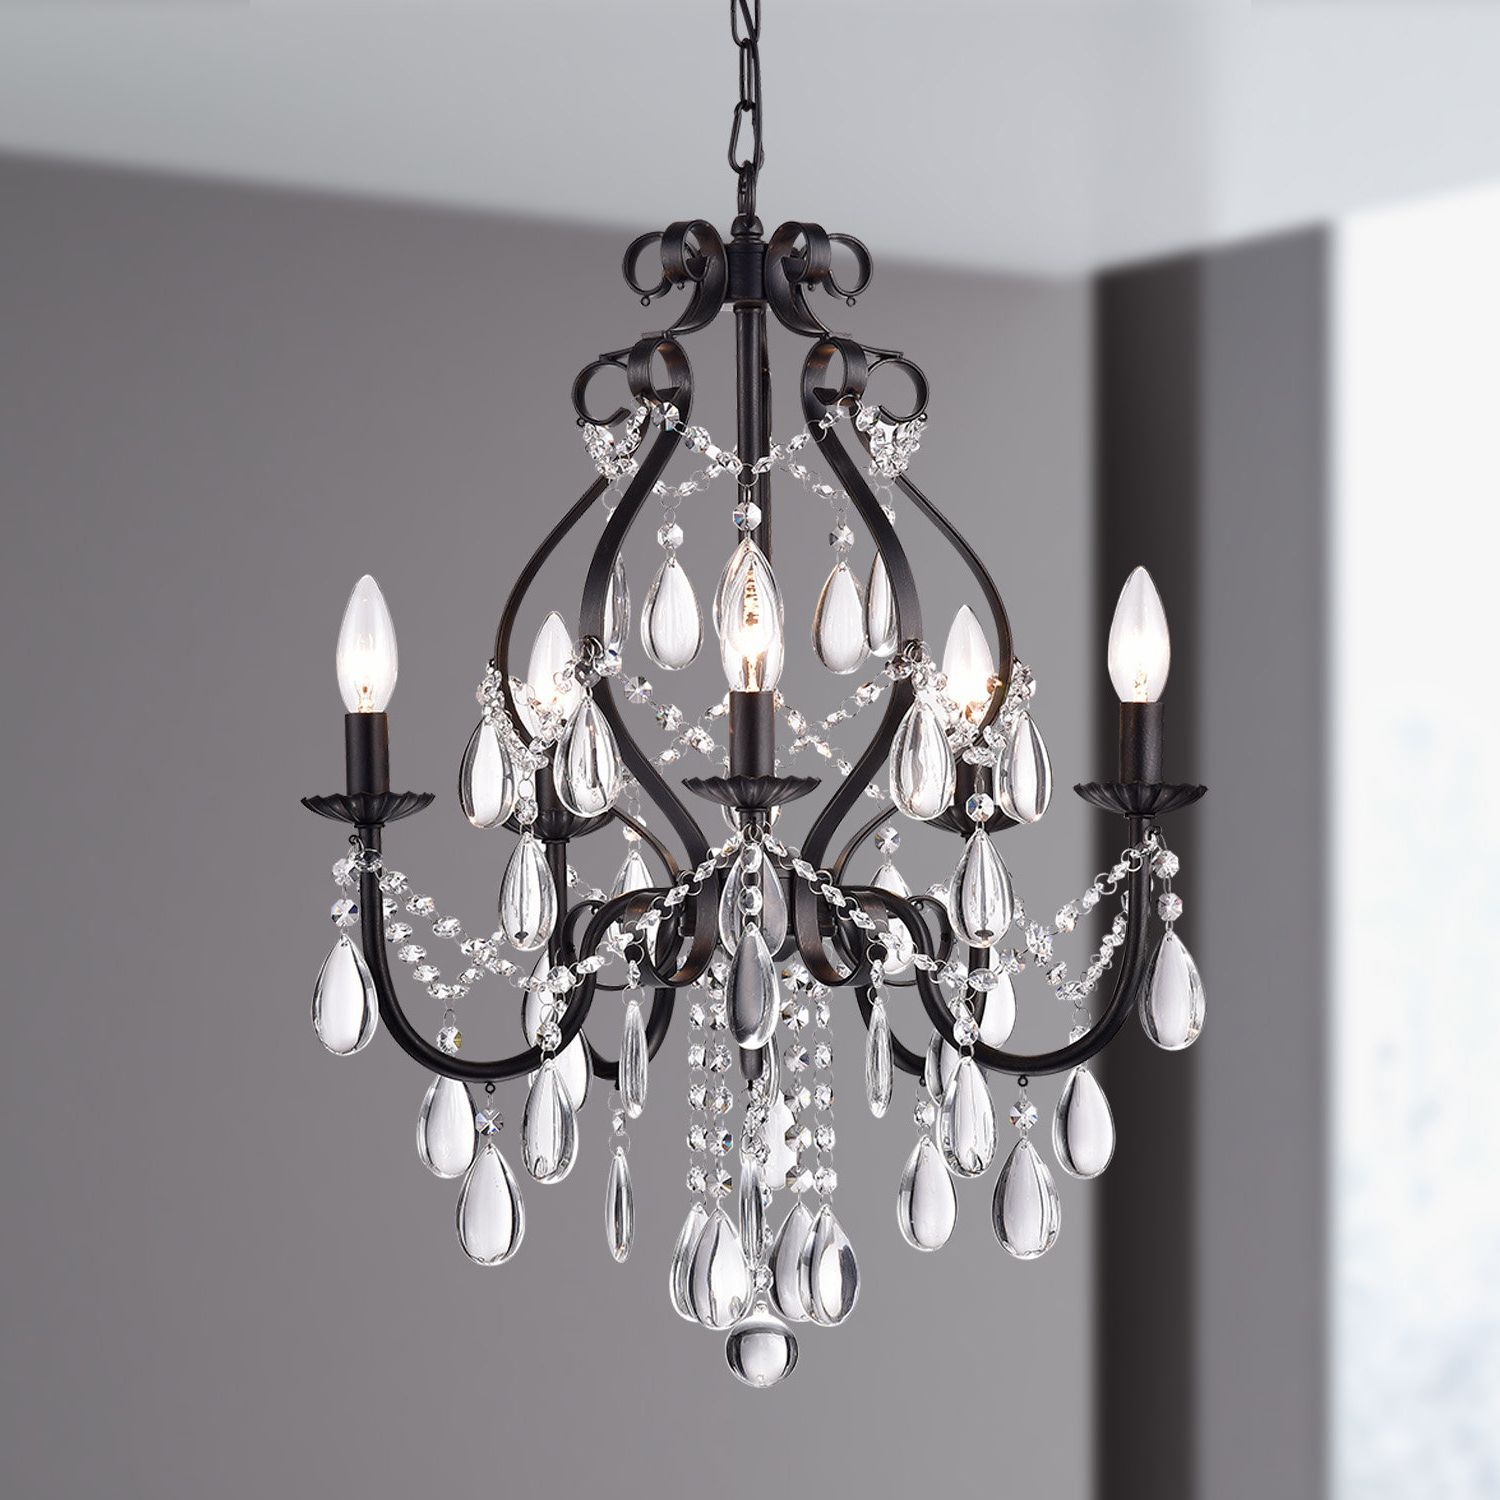 Most Popular Axl 5 Light Candle Style Chandelier In Blanchette 5 Light Candle Style Chandeliers (View 7 of 25)